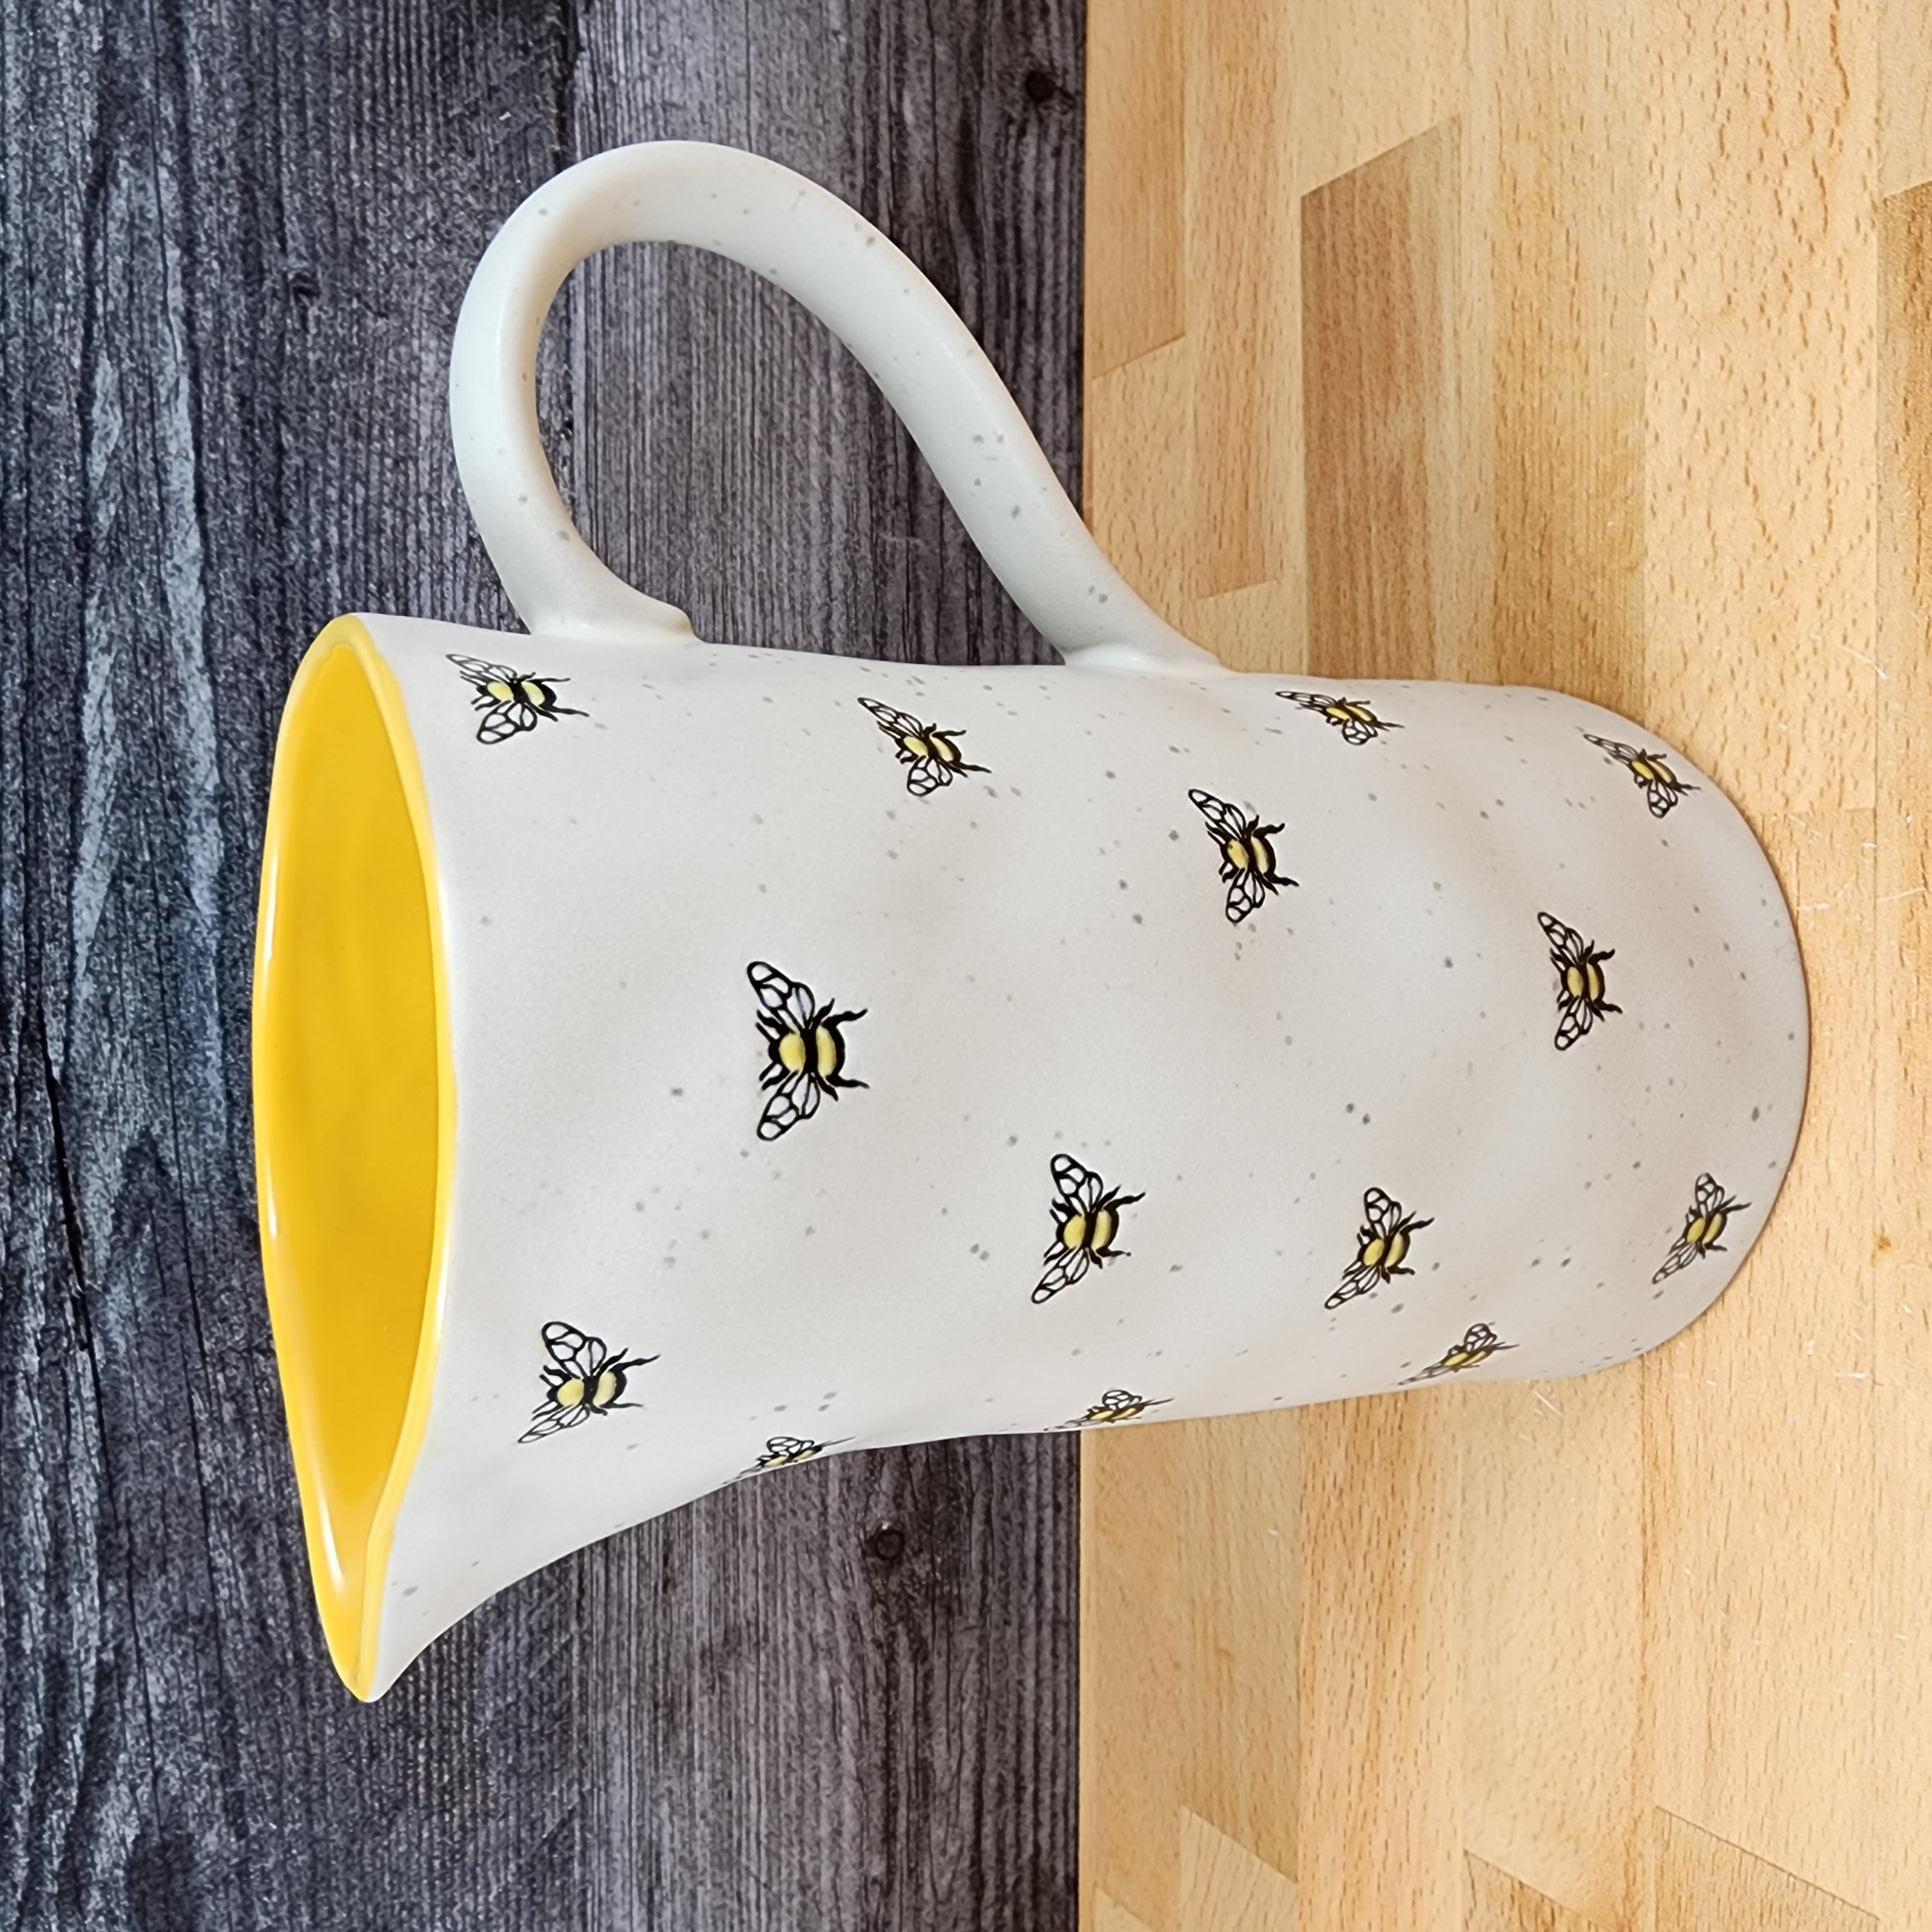 This Honey Bee Embossed Pitcher Decorative Home Canister by Blue Sky is made with love by Premier Homegoods! Shop more unique gift ideas today with Spots Initiatives, the best way to support creators.